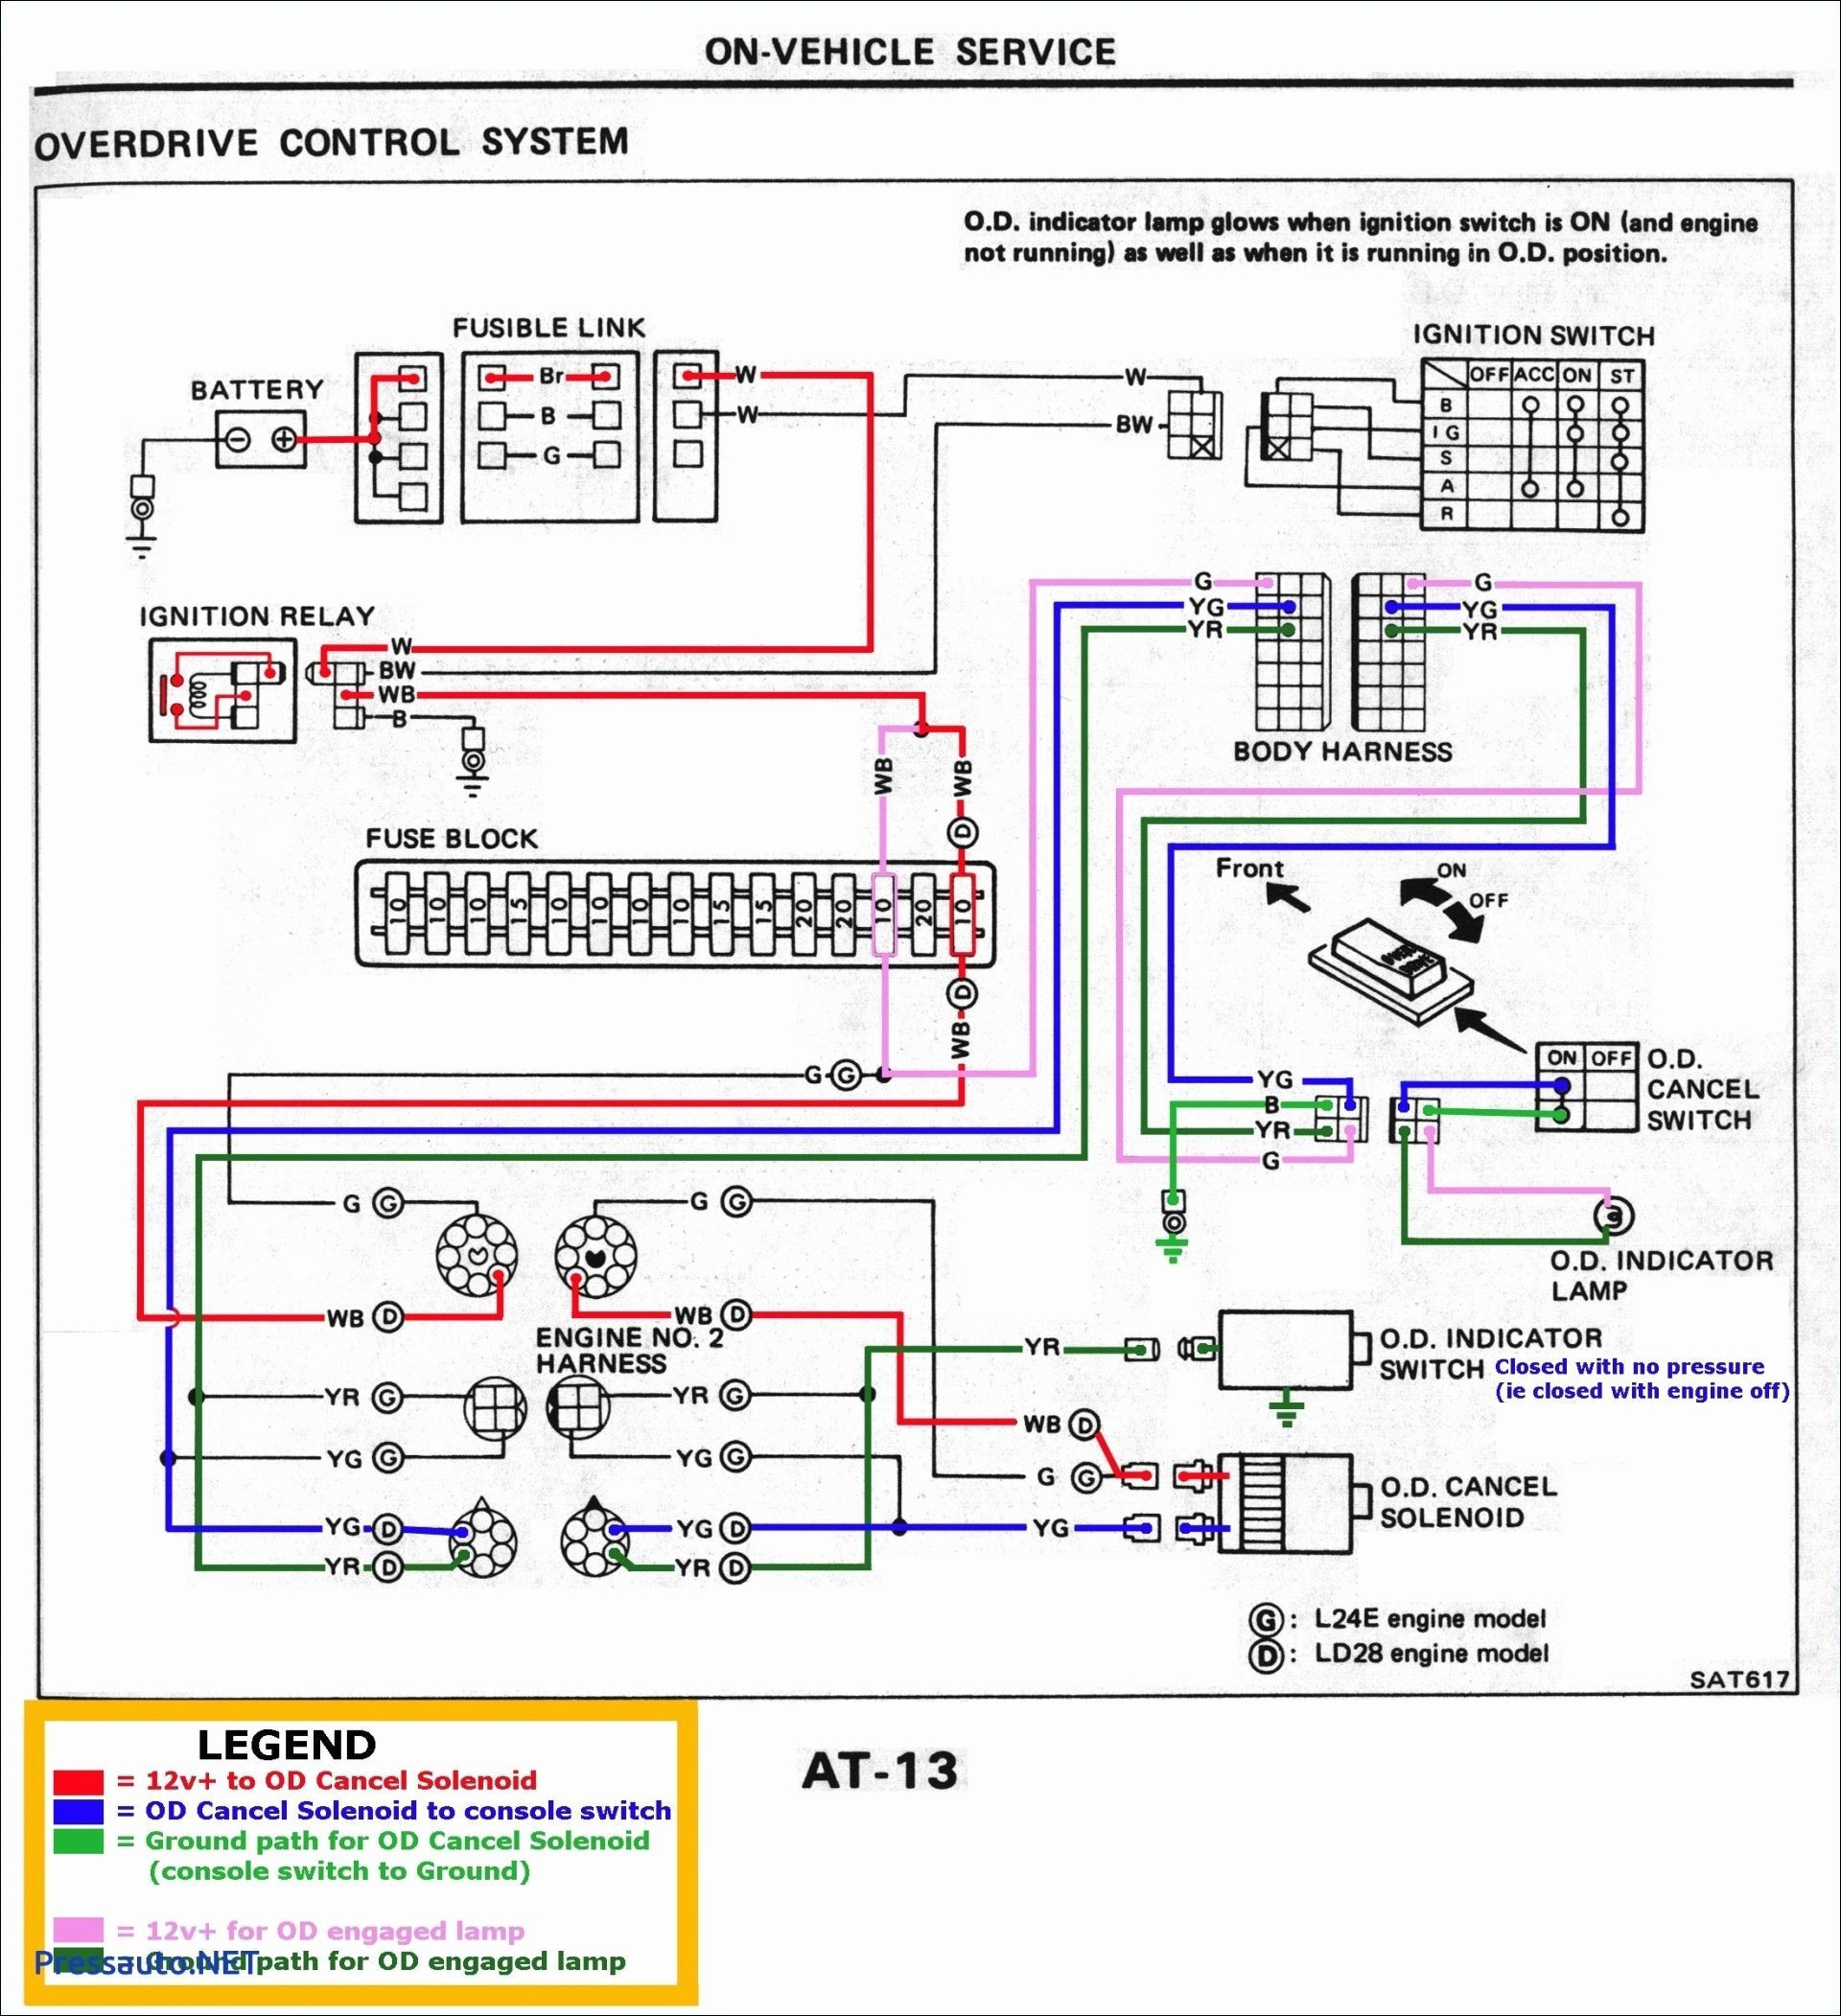 2 pin flasher relay wiring diagram wire diagram2 pin flasher relay wiring diagram new wiring diagram